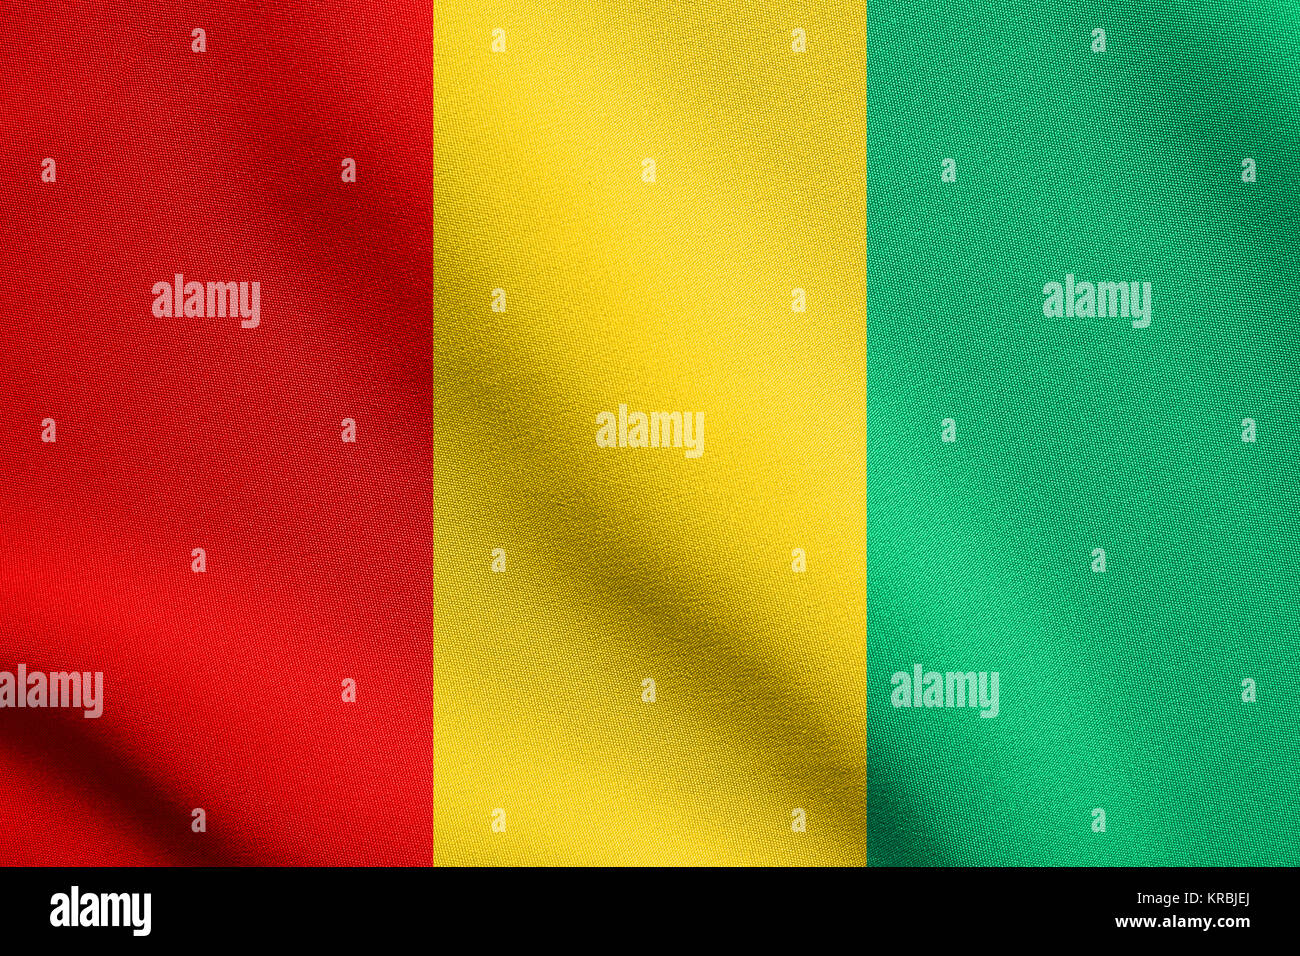 Flag of Guinea waving with fabric texture Stock Photo